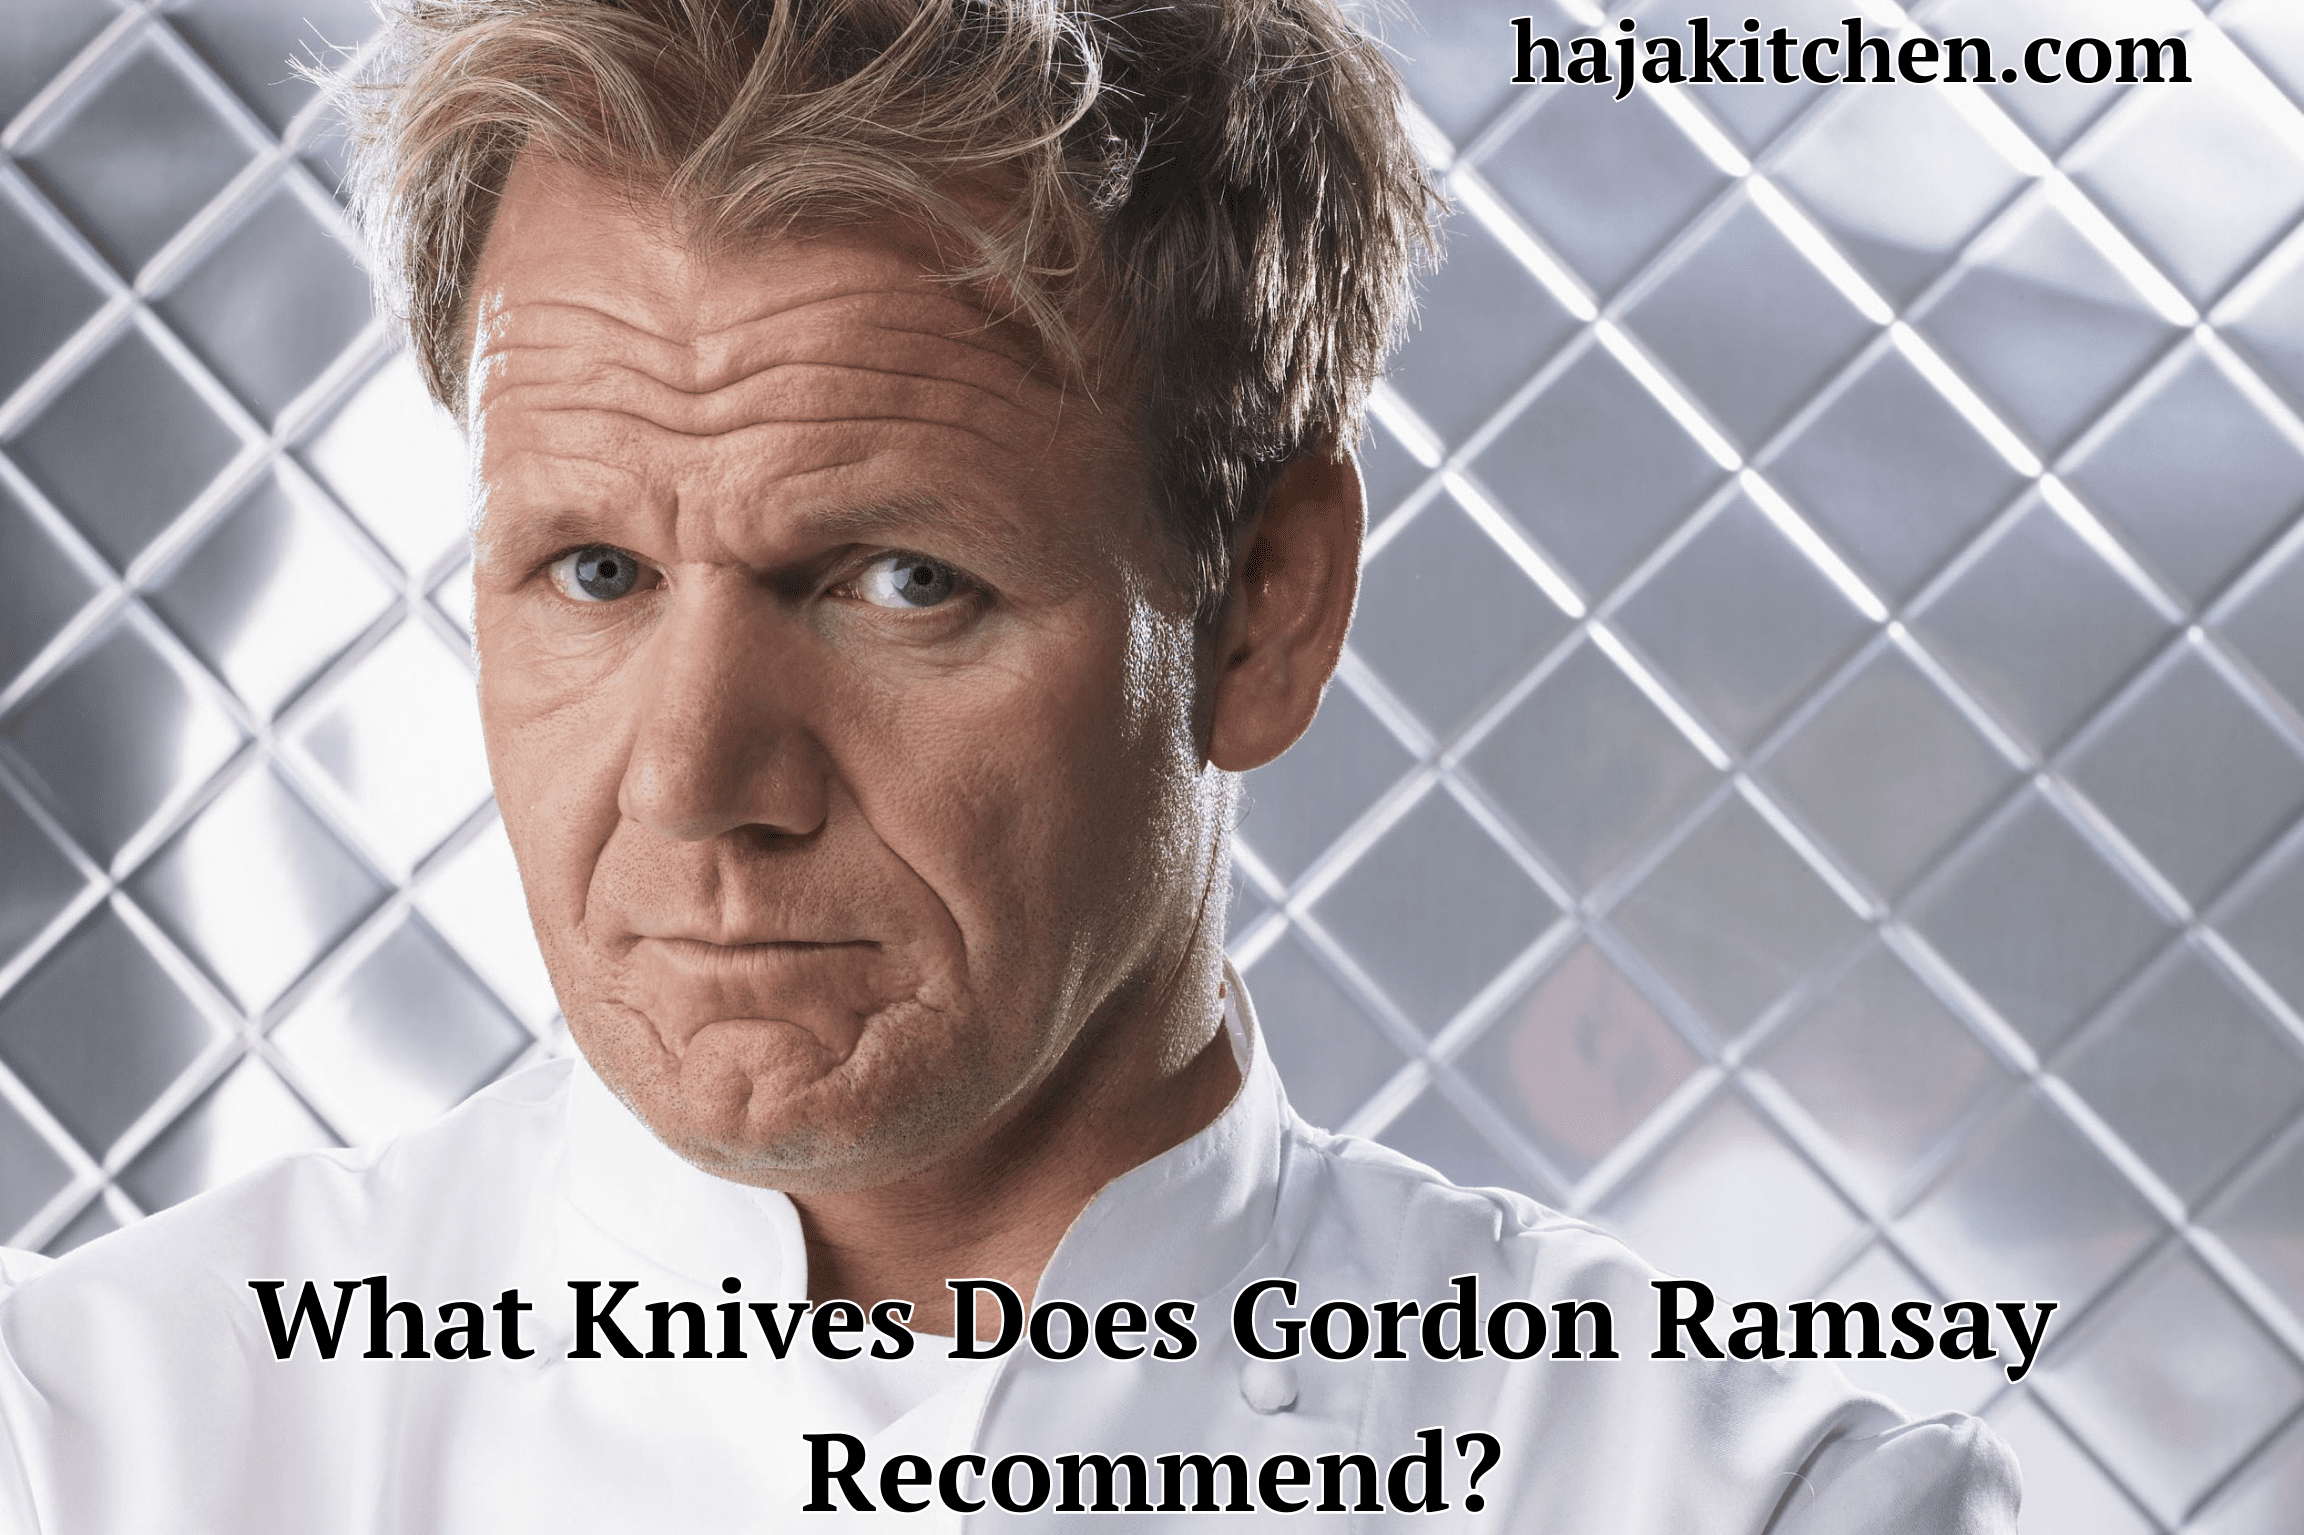 What Knives Does Gordon Ramsay Recommend?